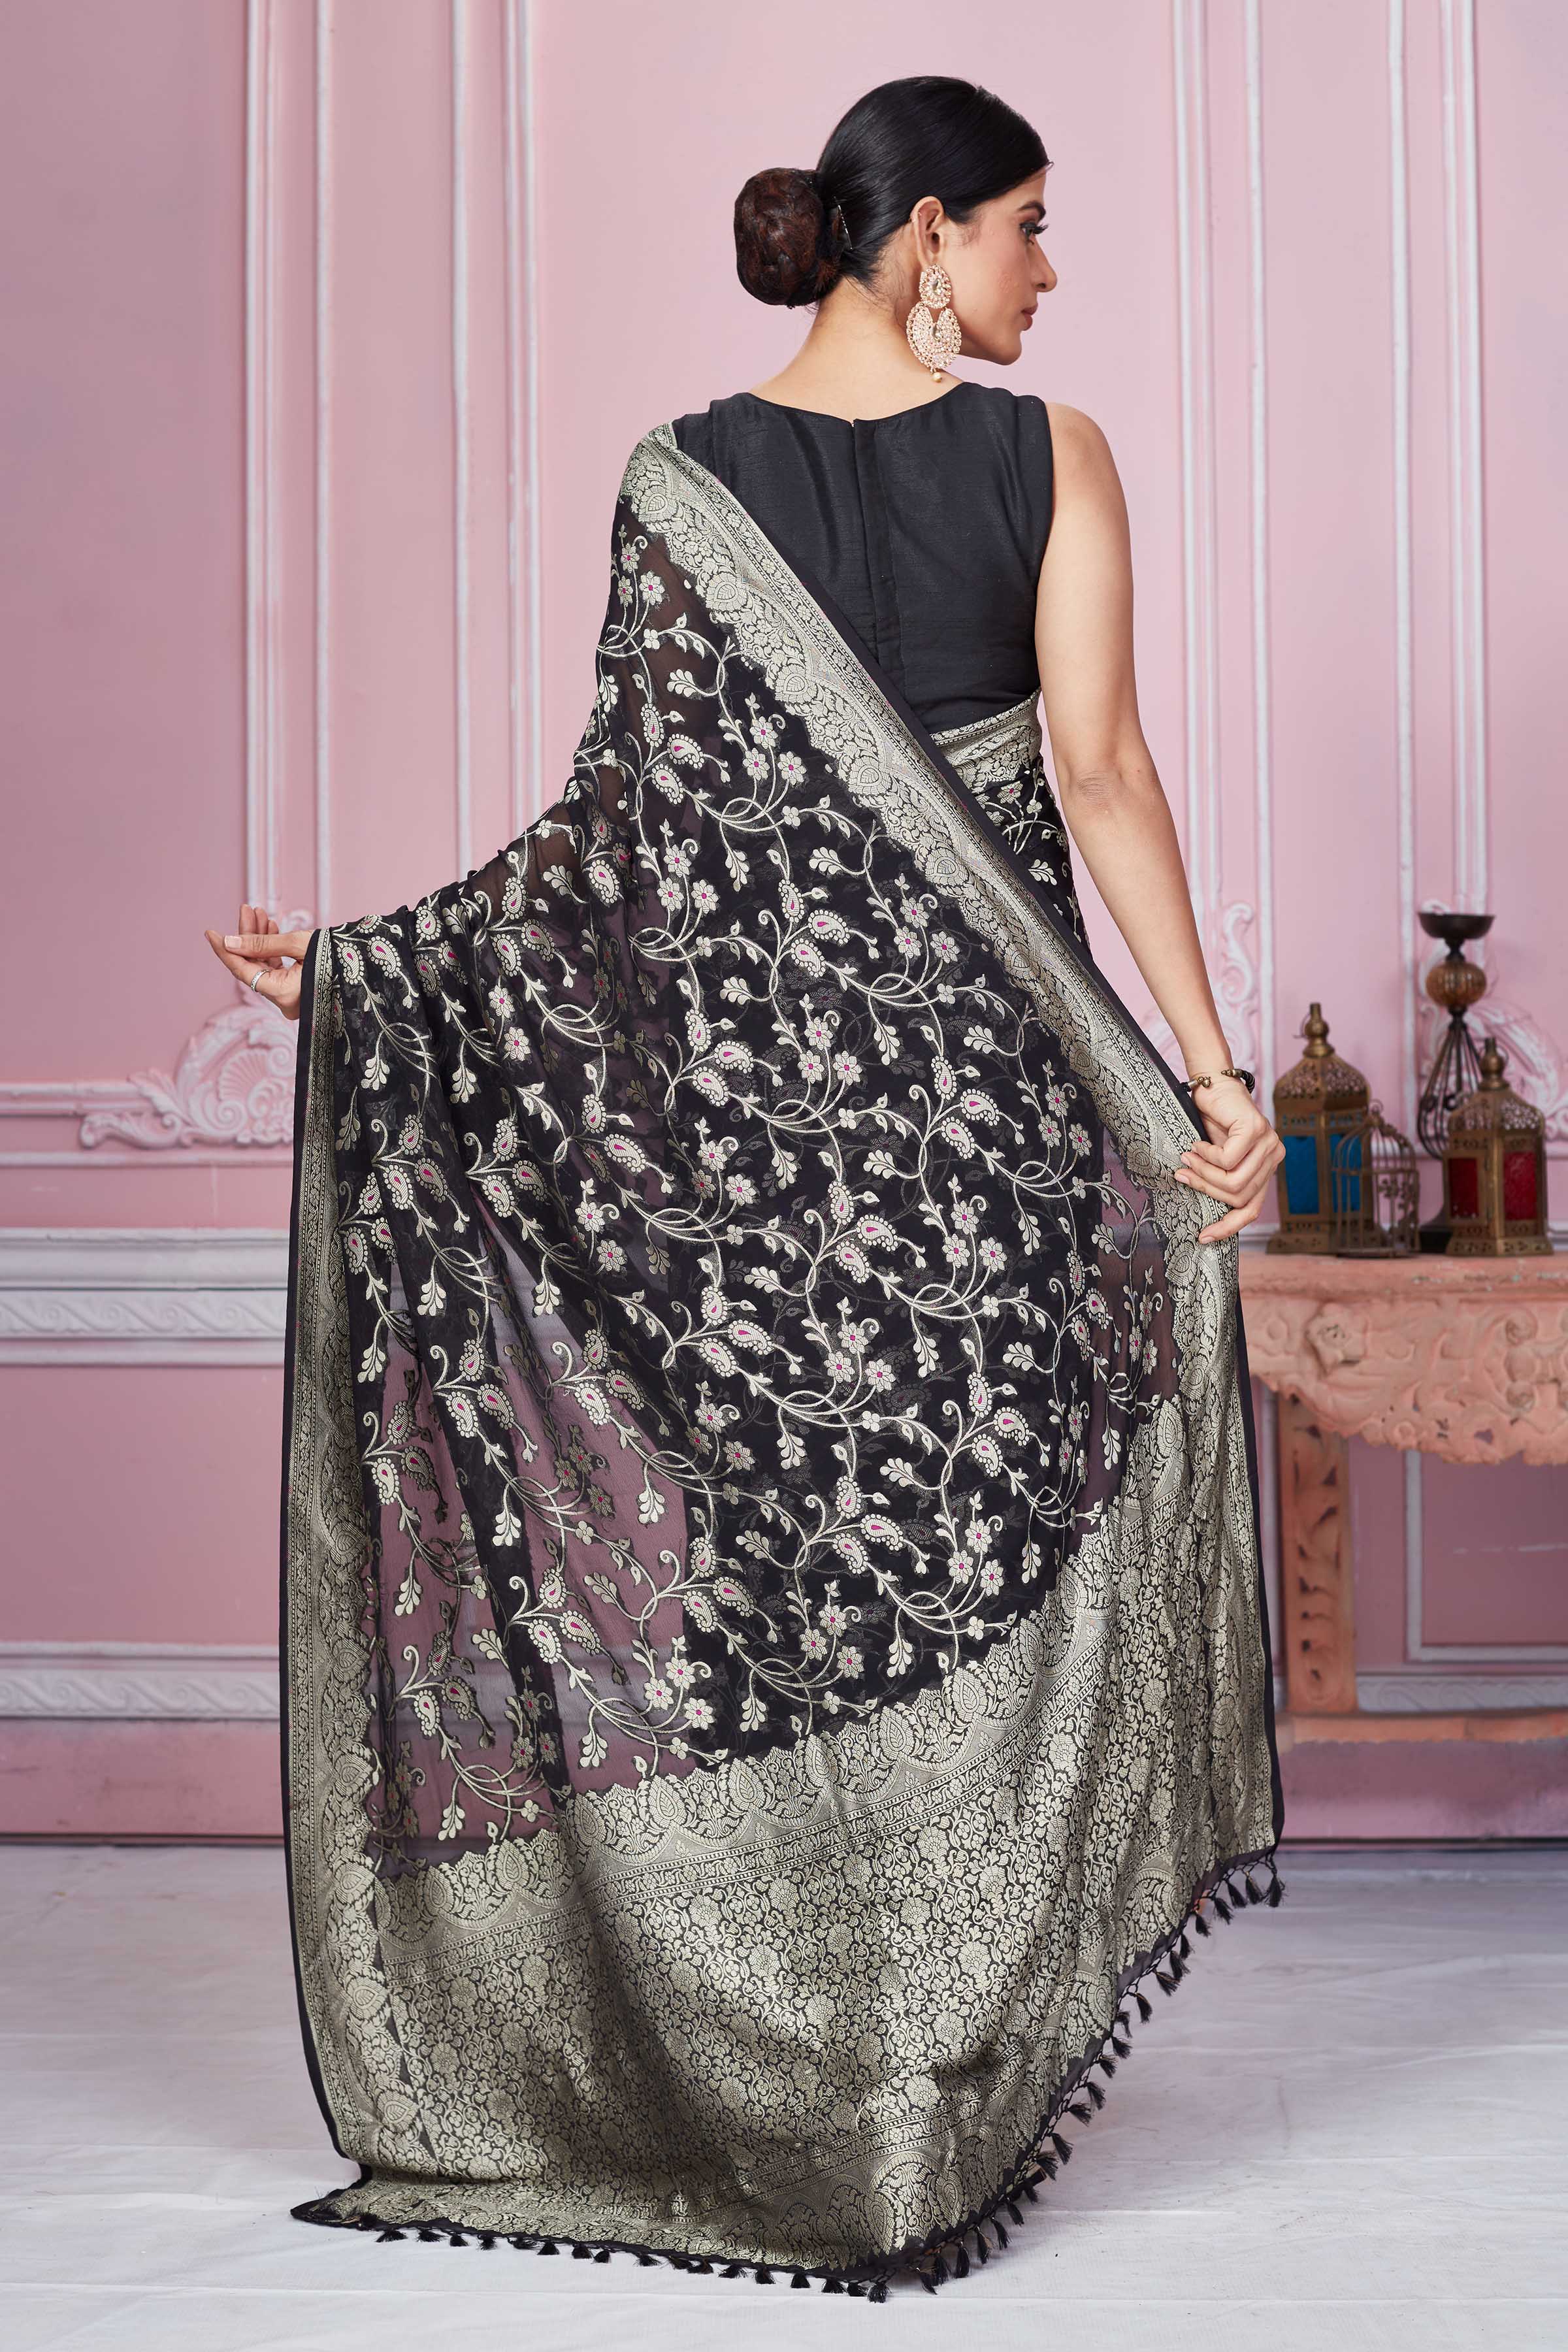 Shop black Banarasi sari online in USA with floral zari jaal. Look your best on festive occasions in latest designer sarees, pure silk saris, Kanchipuram silk sarees, handwoven sarees, tussar silk saris, embroidered sarees from Pure Elegance Indian fashion store in USA.-back